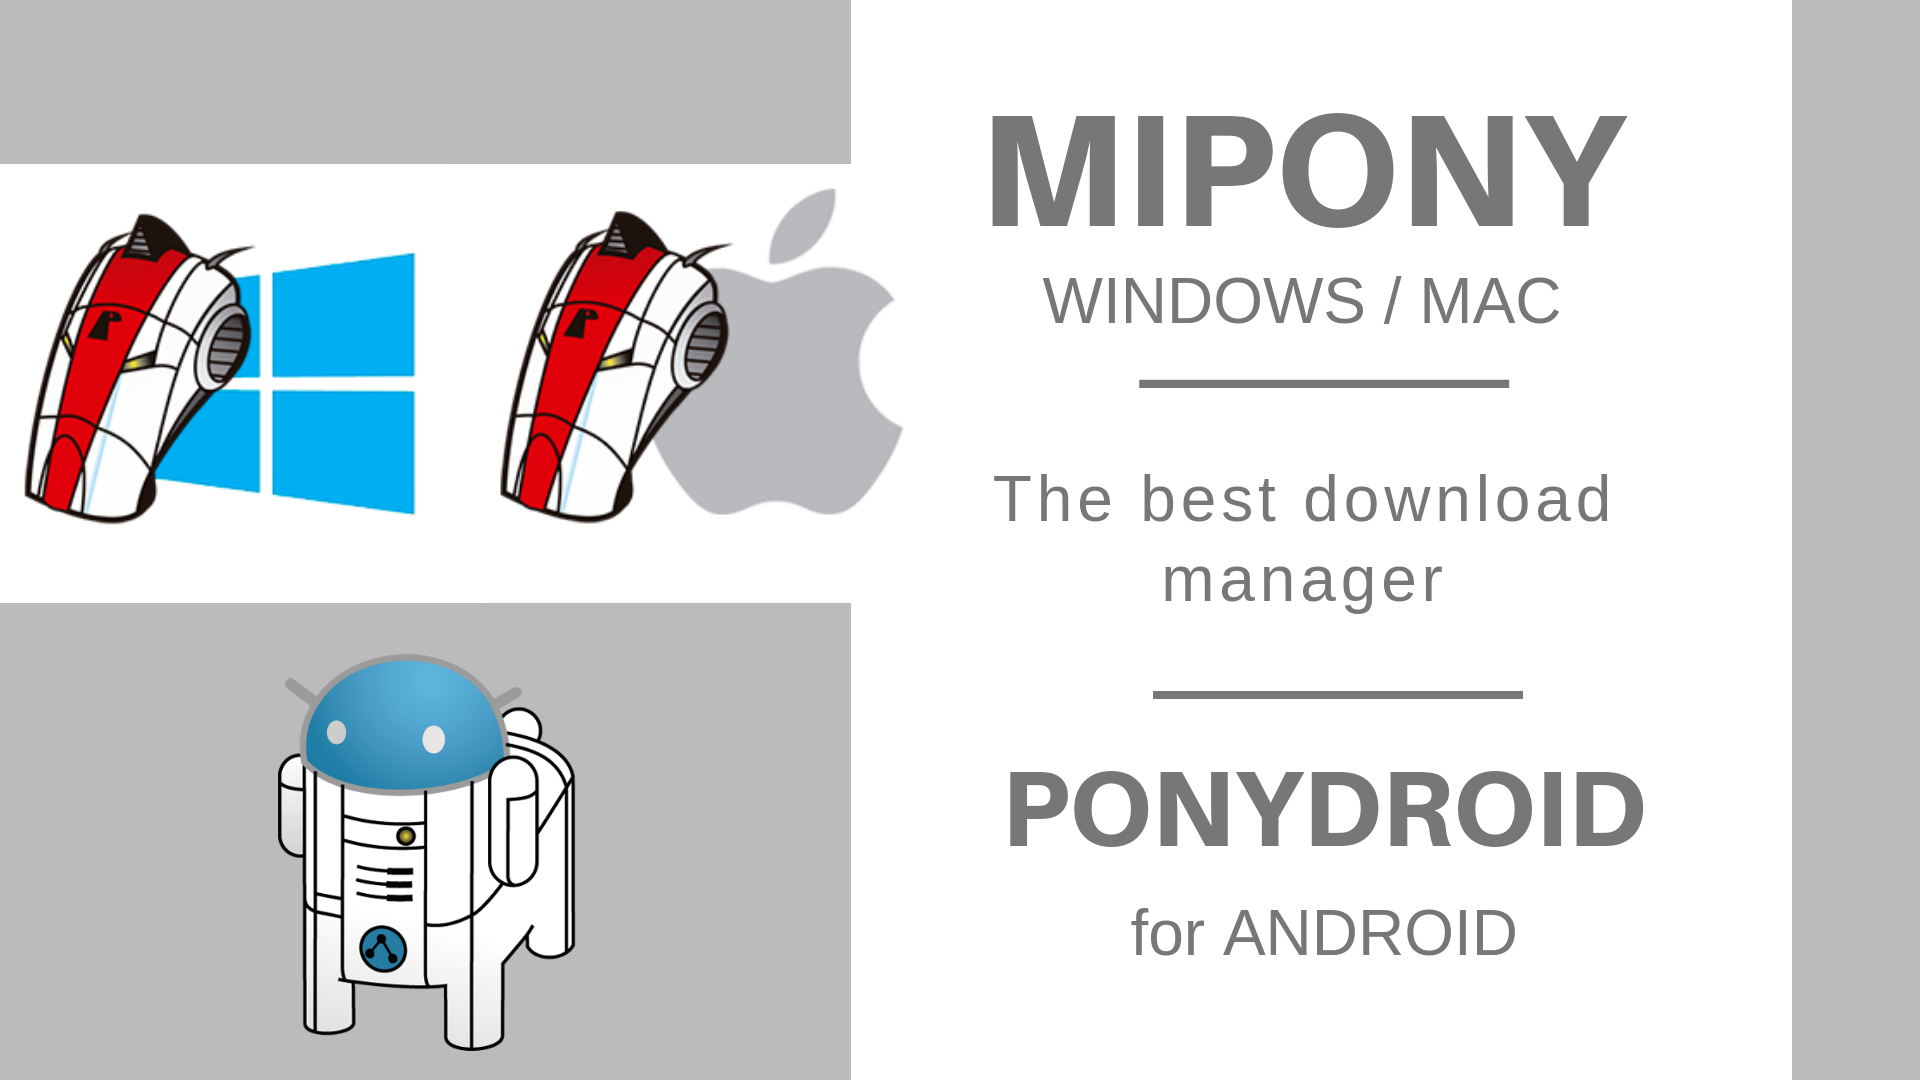 Mipony Pro 3.3.0 download the last version for ios